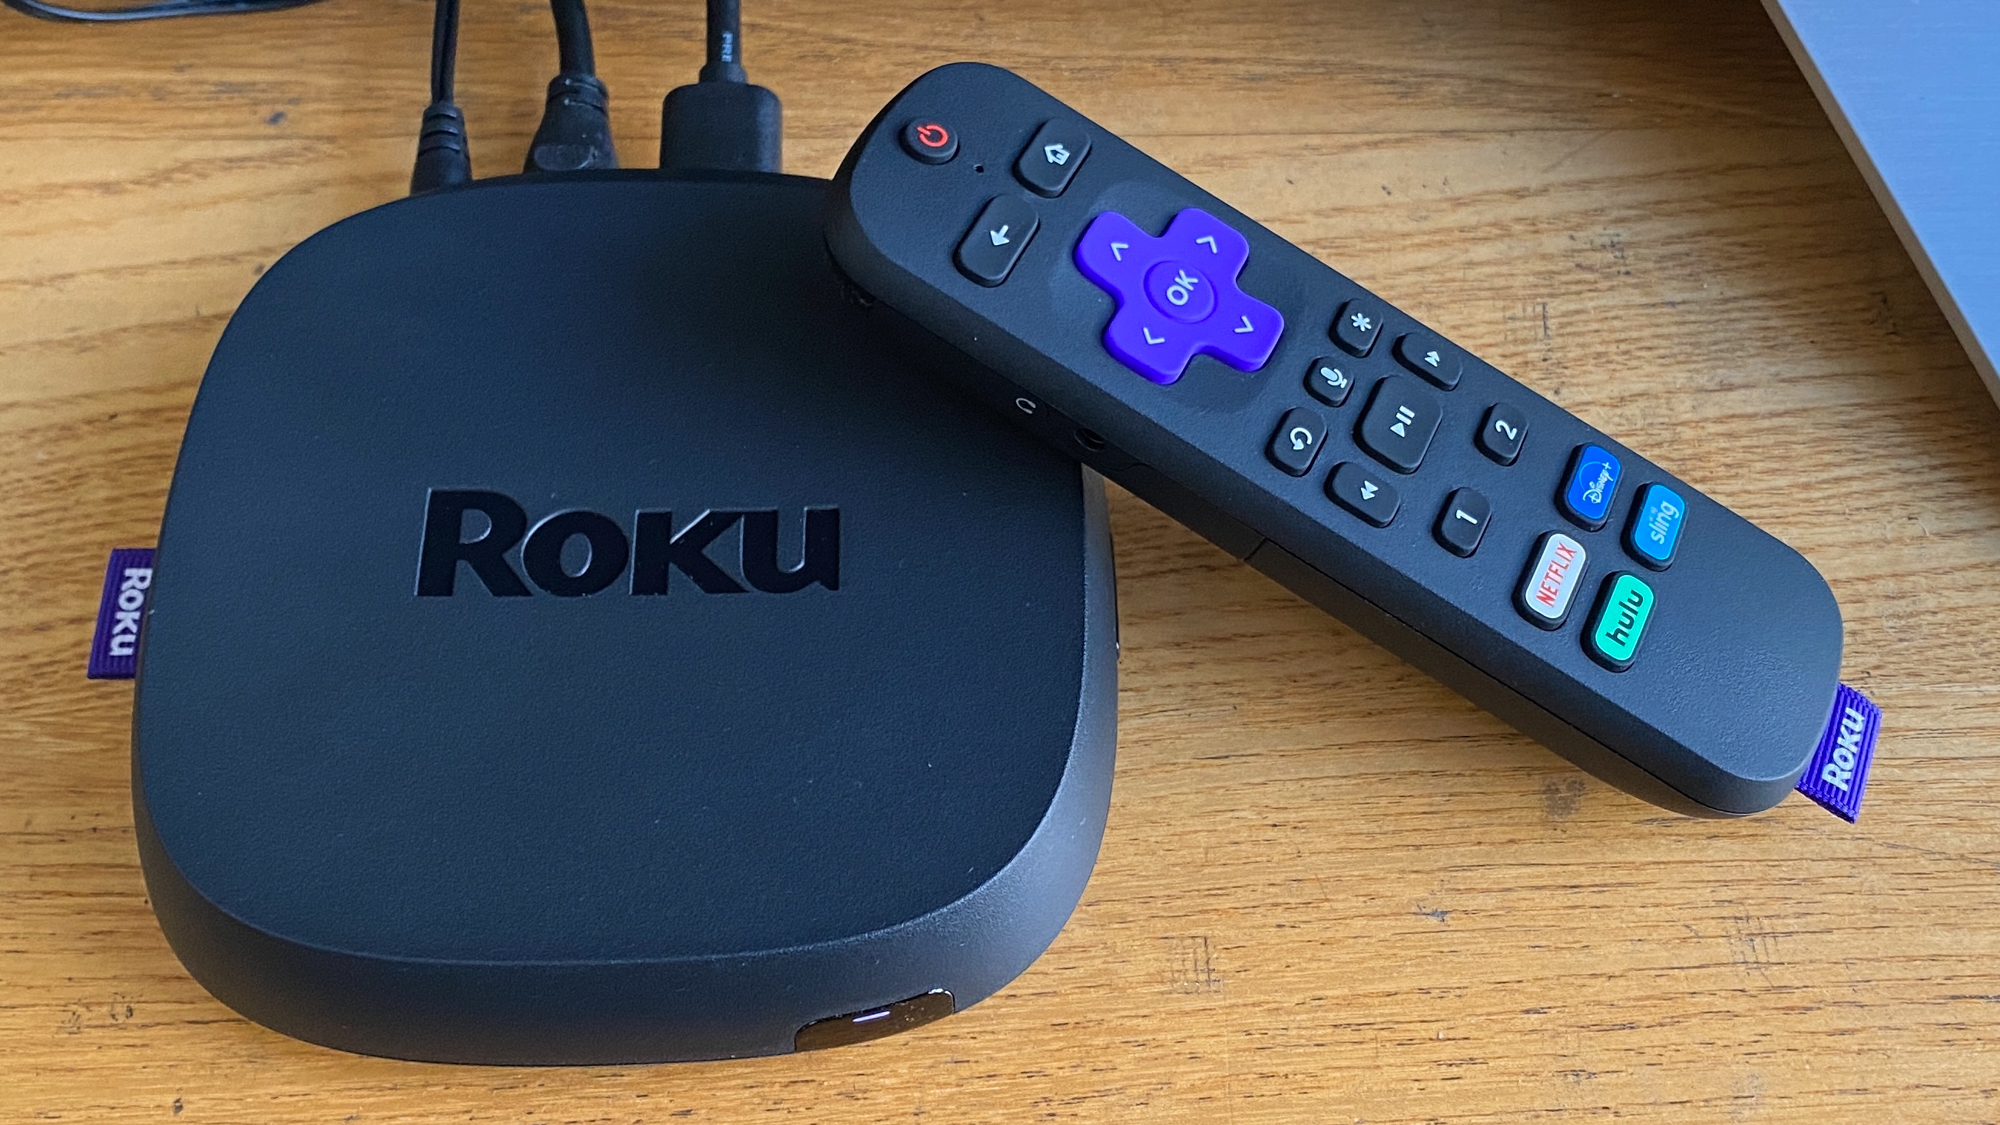 The Roku Ultra (one of the best Roku devices) and its remote, on a wooden surface